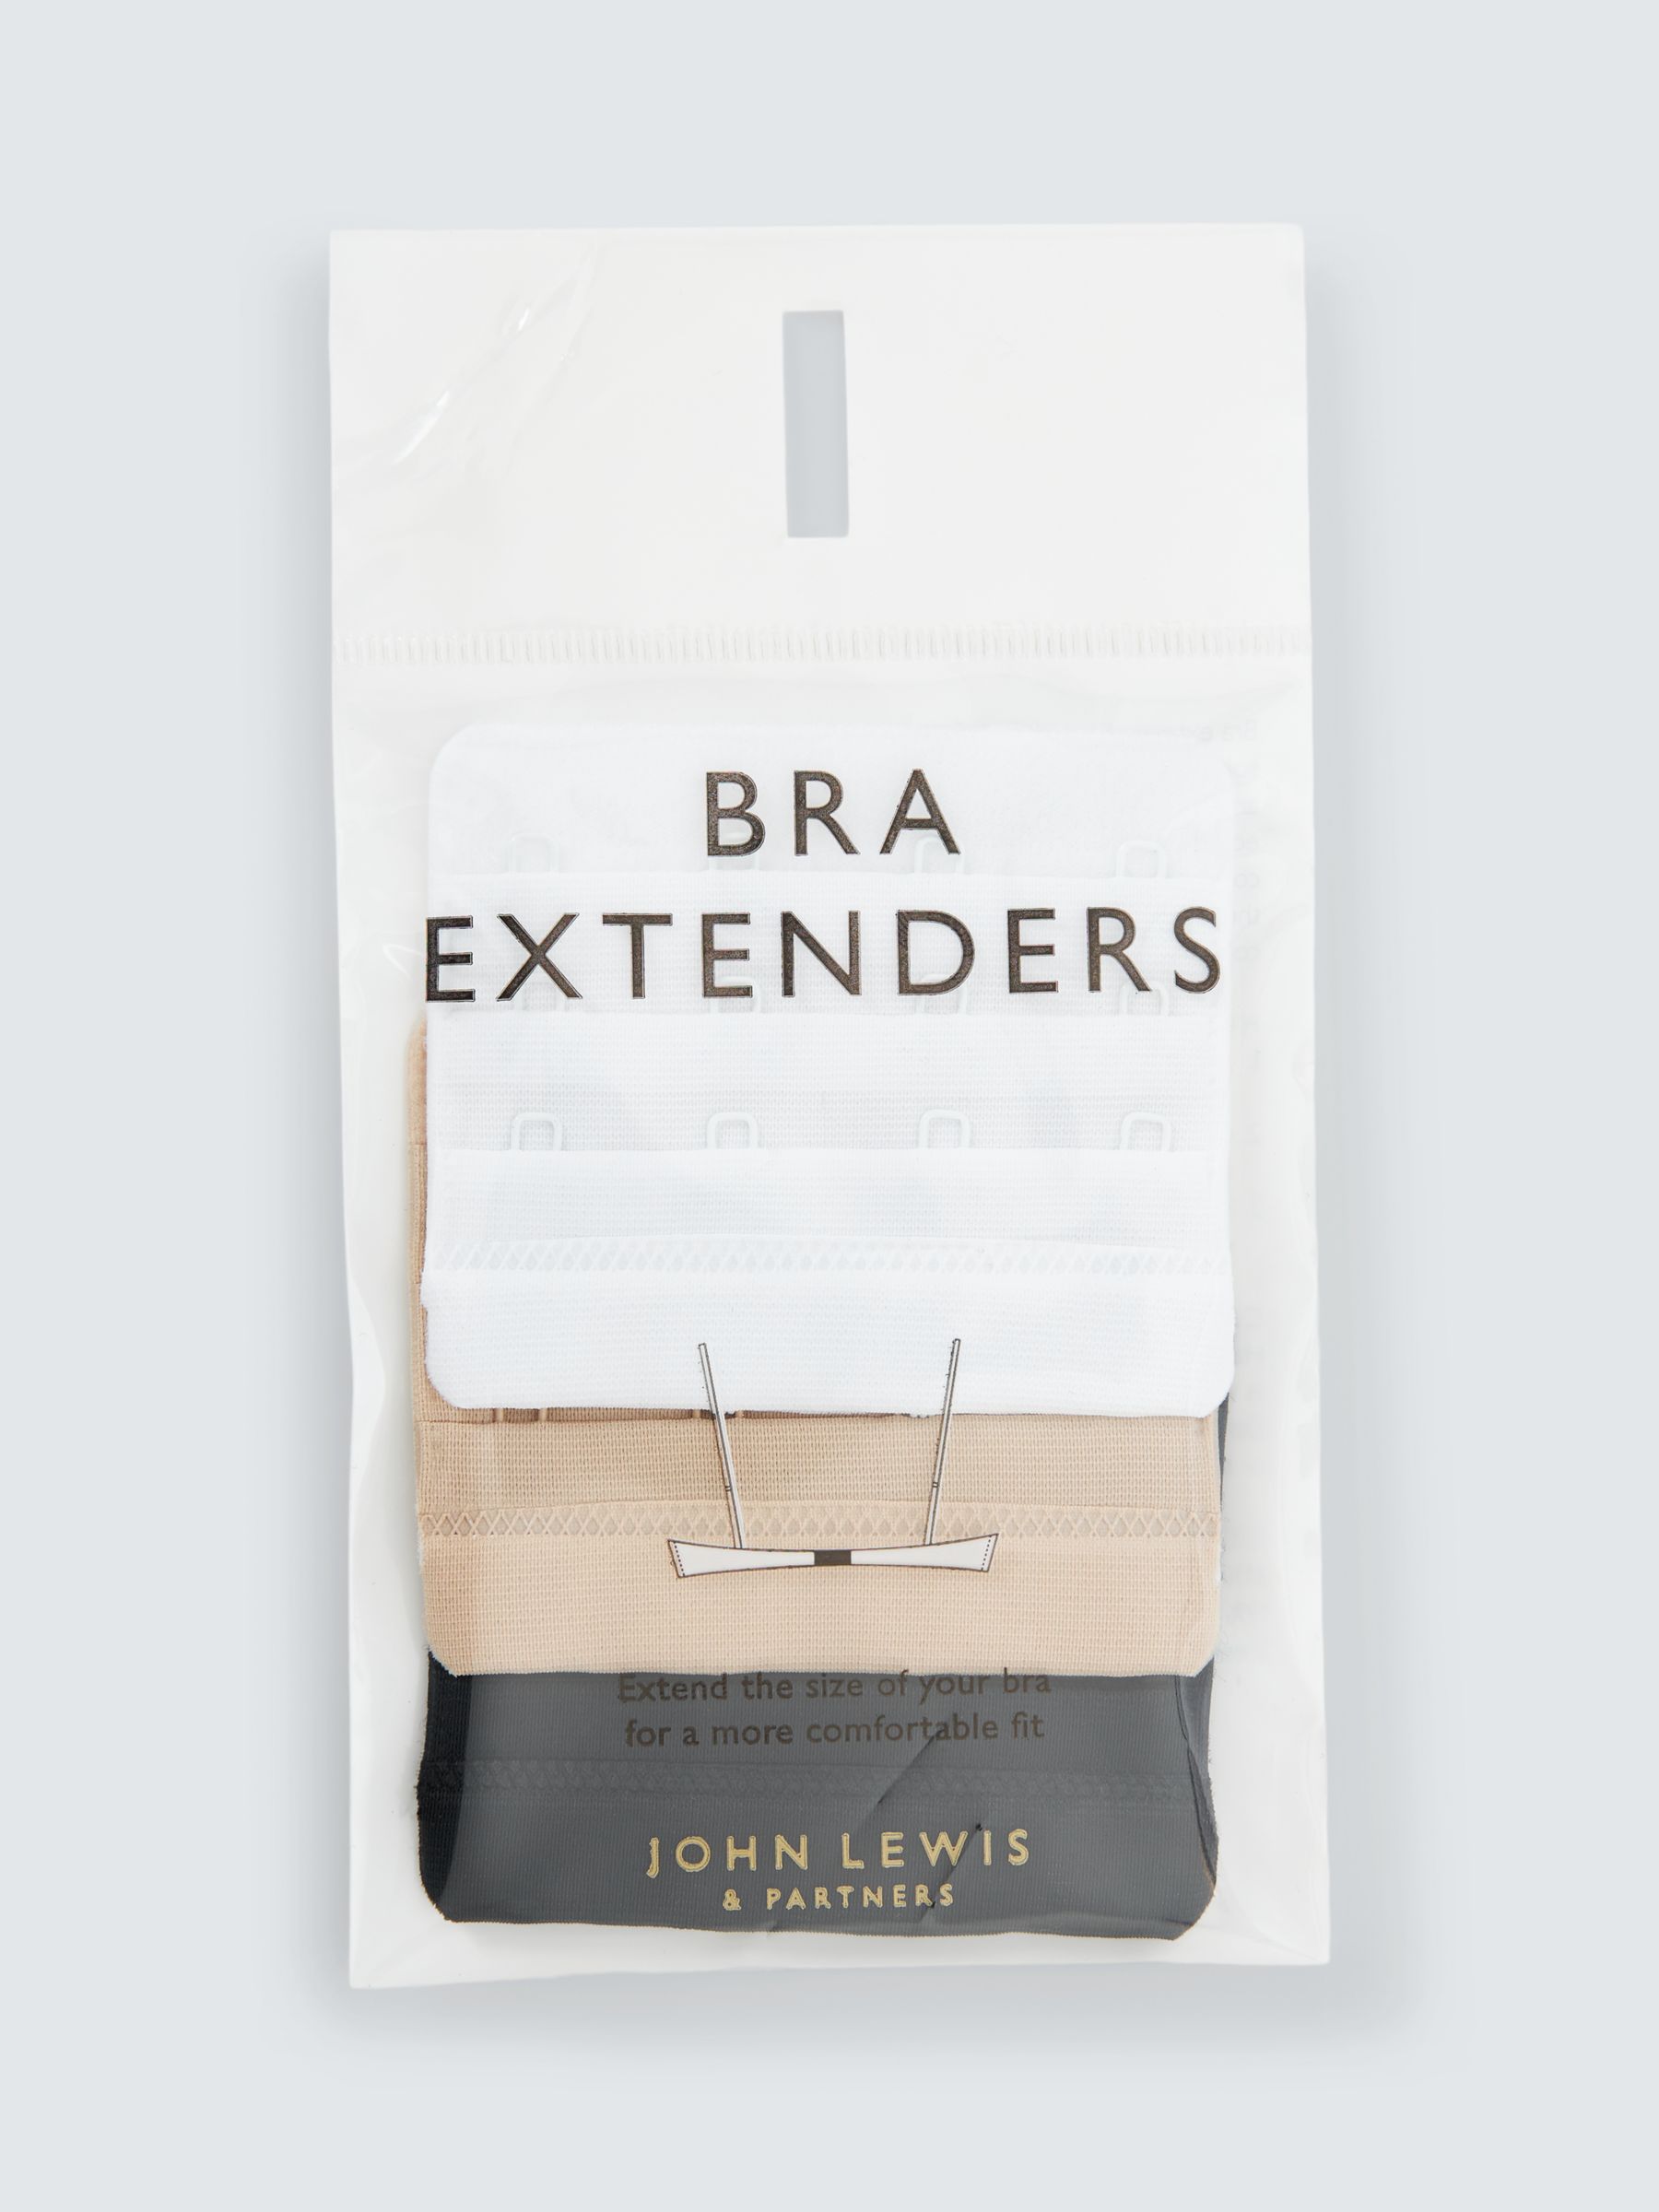 Bra extenders for extra inches of comfort